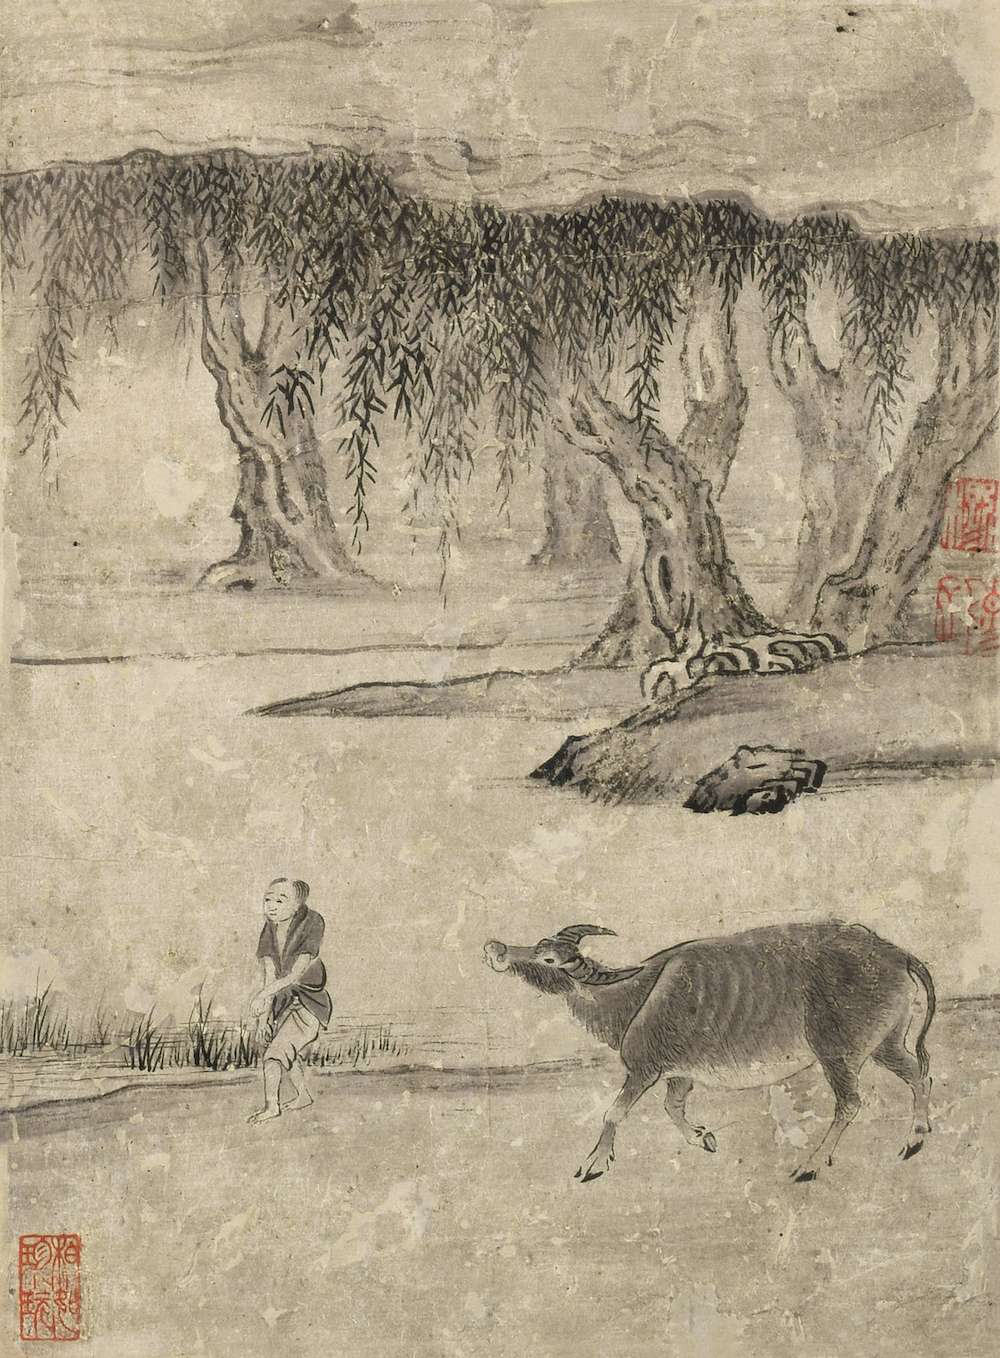 (Ming) Zhang Mu's Atlas of Cattle Herding · Taming, Ink and color on paper, 23.7 cm long, 17.7 cm wide, donated by Mr. Yang Quan, collected by Guangzhou Art Museum